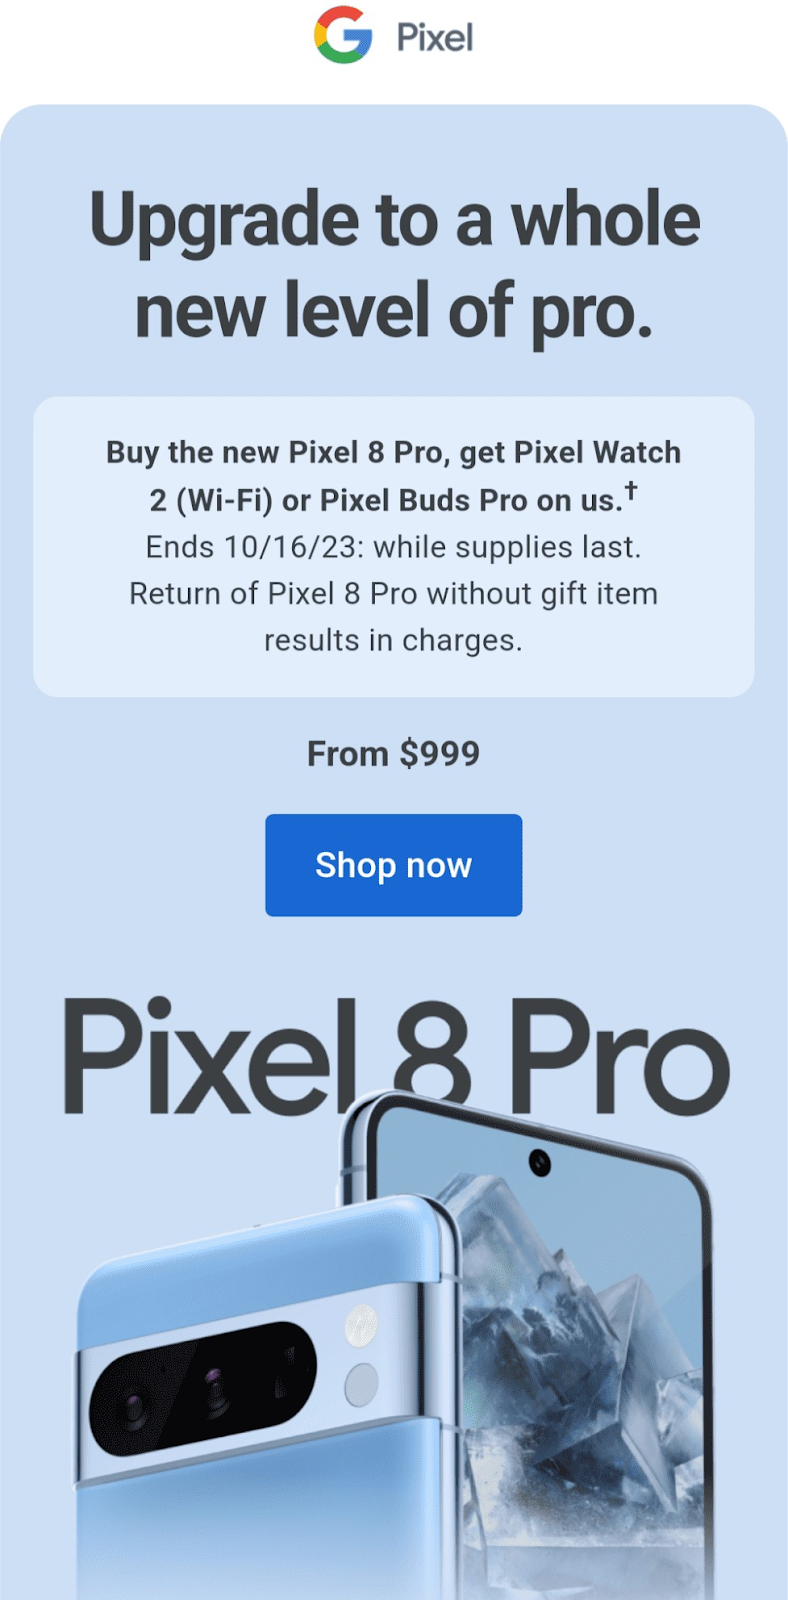 Google's "Upgrade to a whole new level of pro." email recommending Pixel 8 Pro